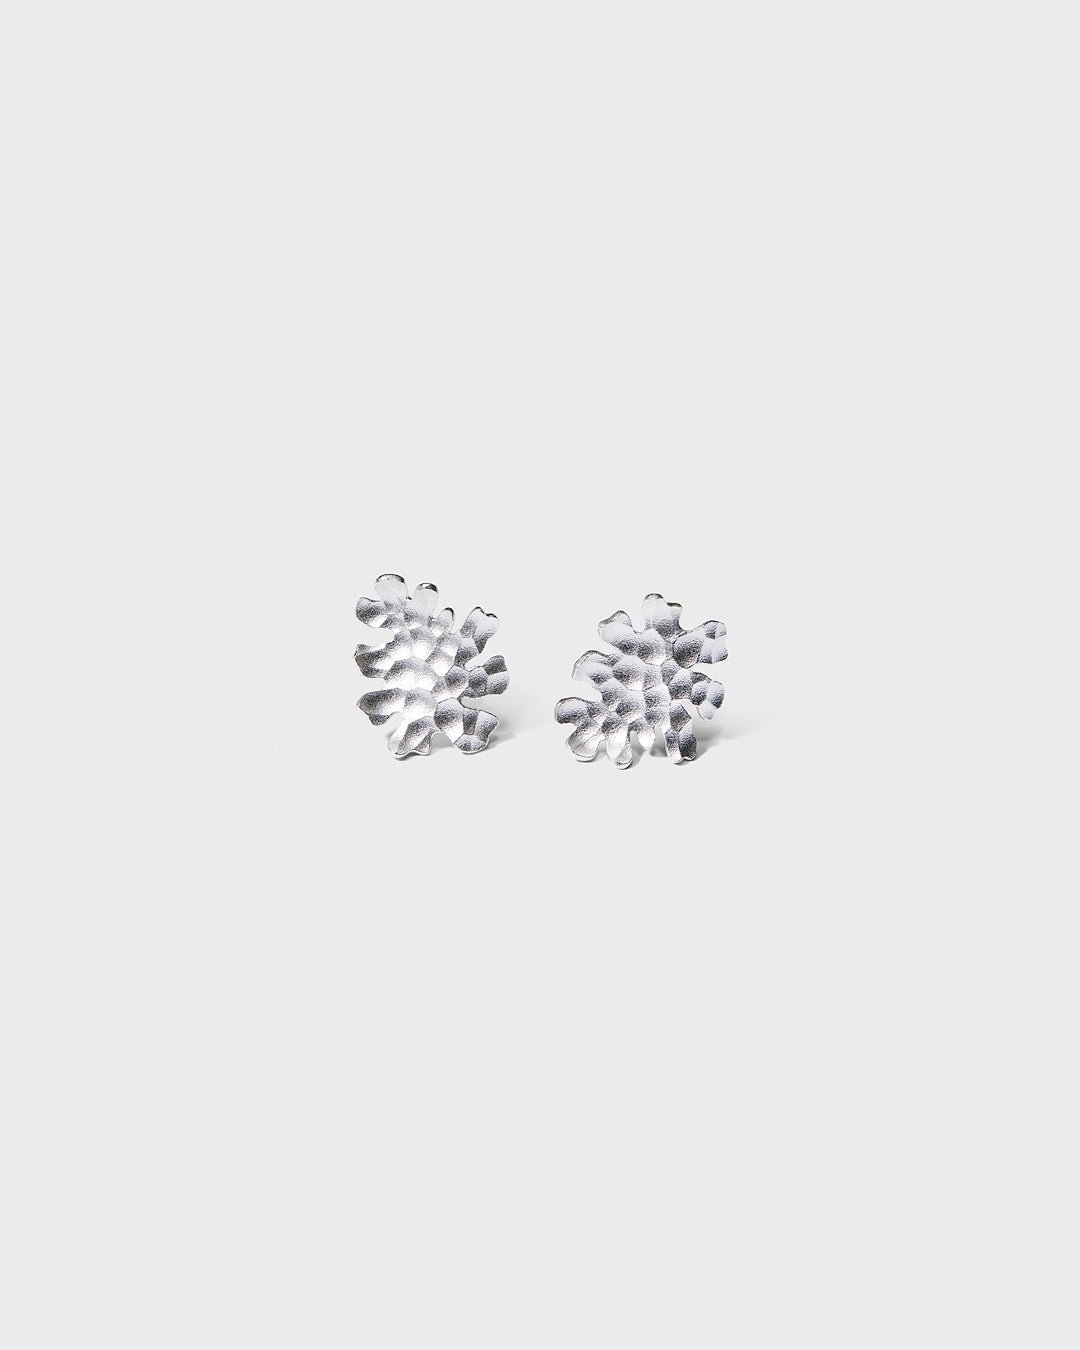 Tundra earrings small silver half pair right